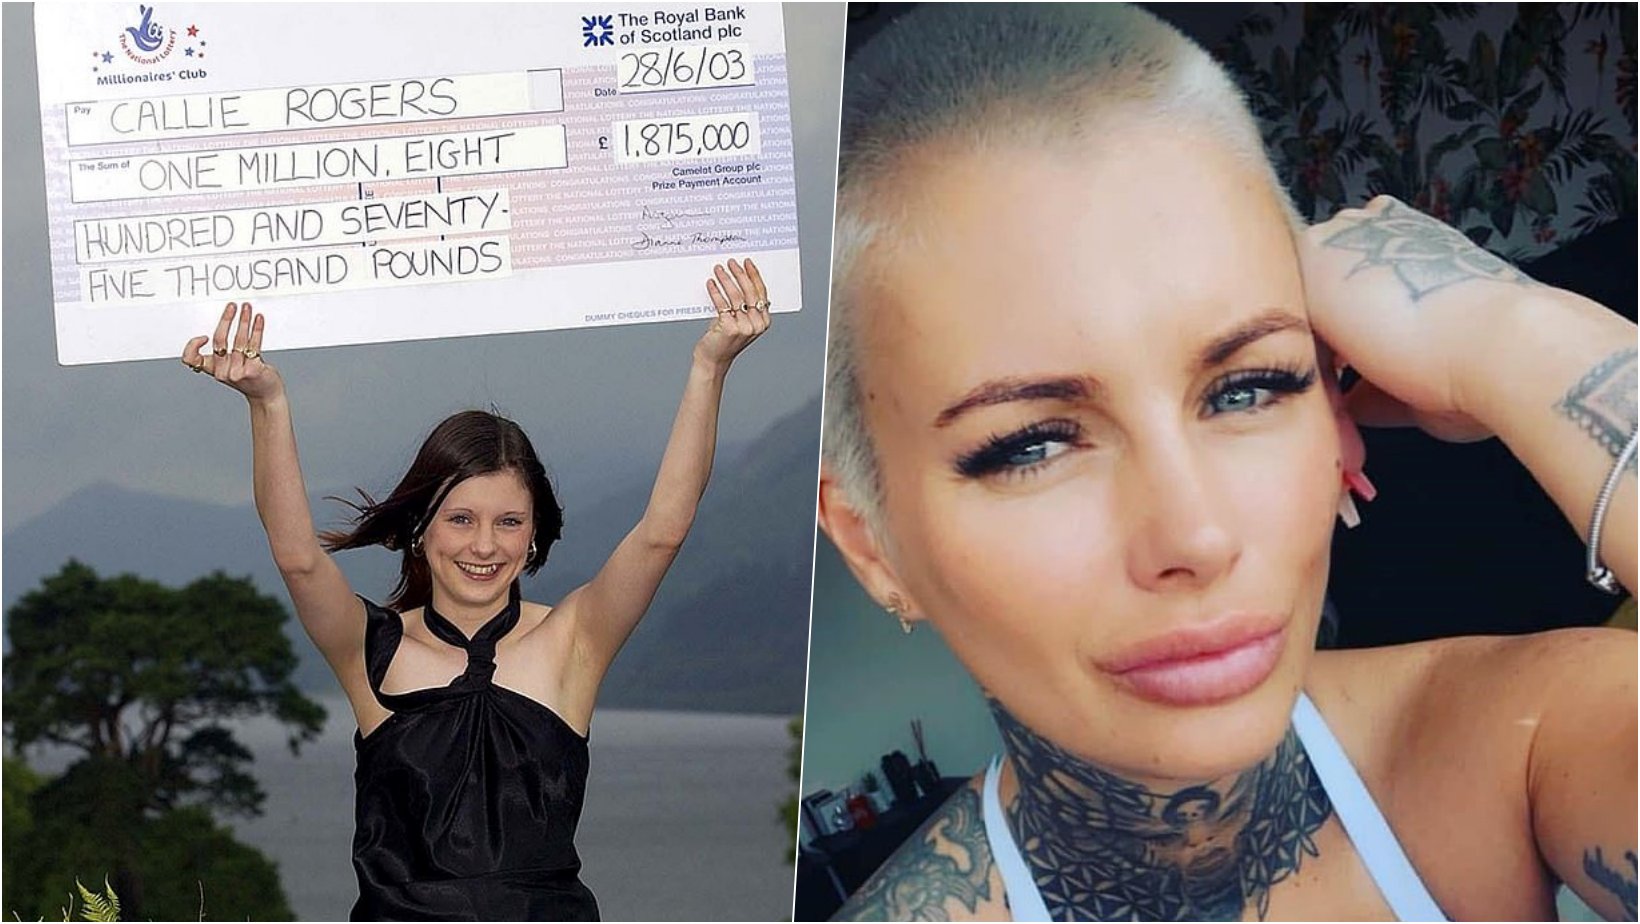 6 facebook cover 43.png?resize=1200,630 - Youngest Lottery Winner Looks Almost Unrecognizable After Spending Her Winnings To Plastic Surgeries